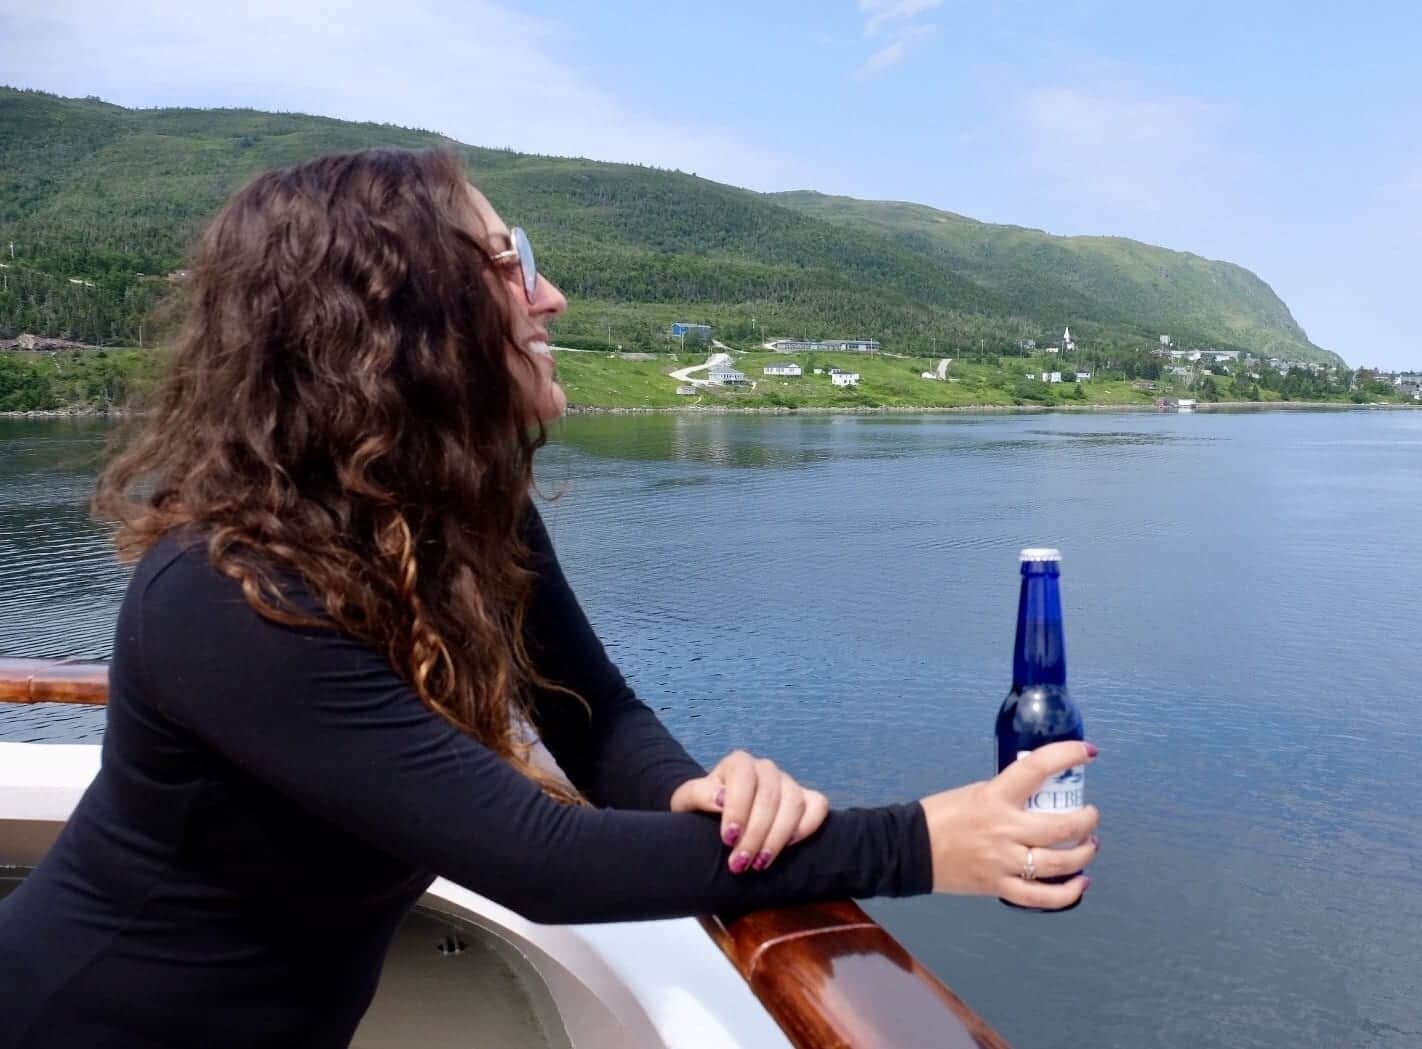 Kate leans over the edge of a ship, holding a cobalt blue Iceberg Beer bottle in her hand and looking over the glassy bright blue Bonne Bay in Newfoundland.